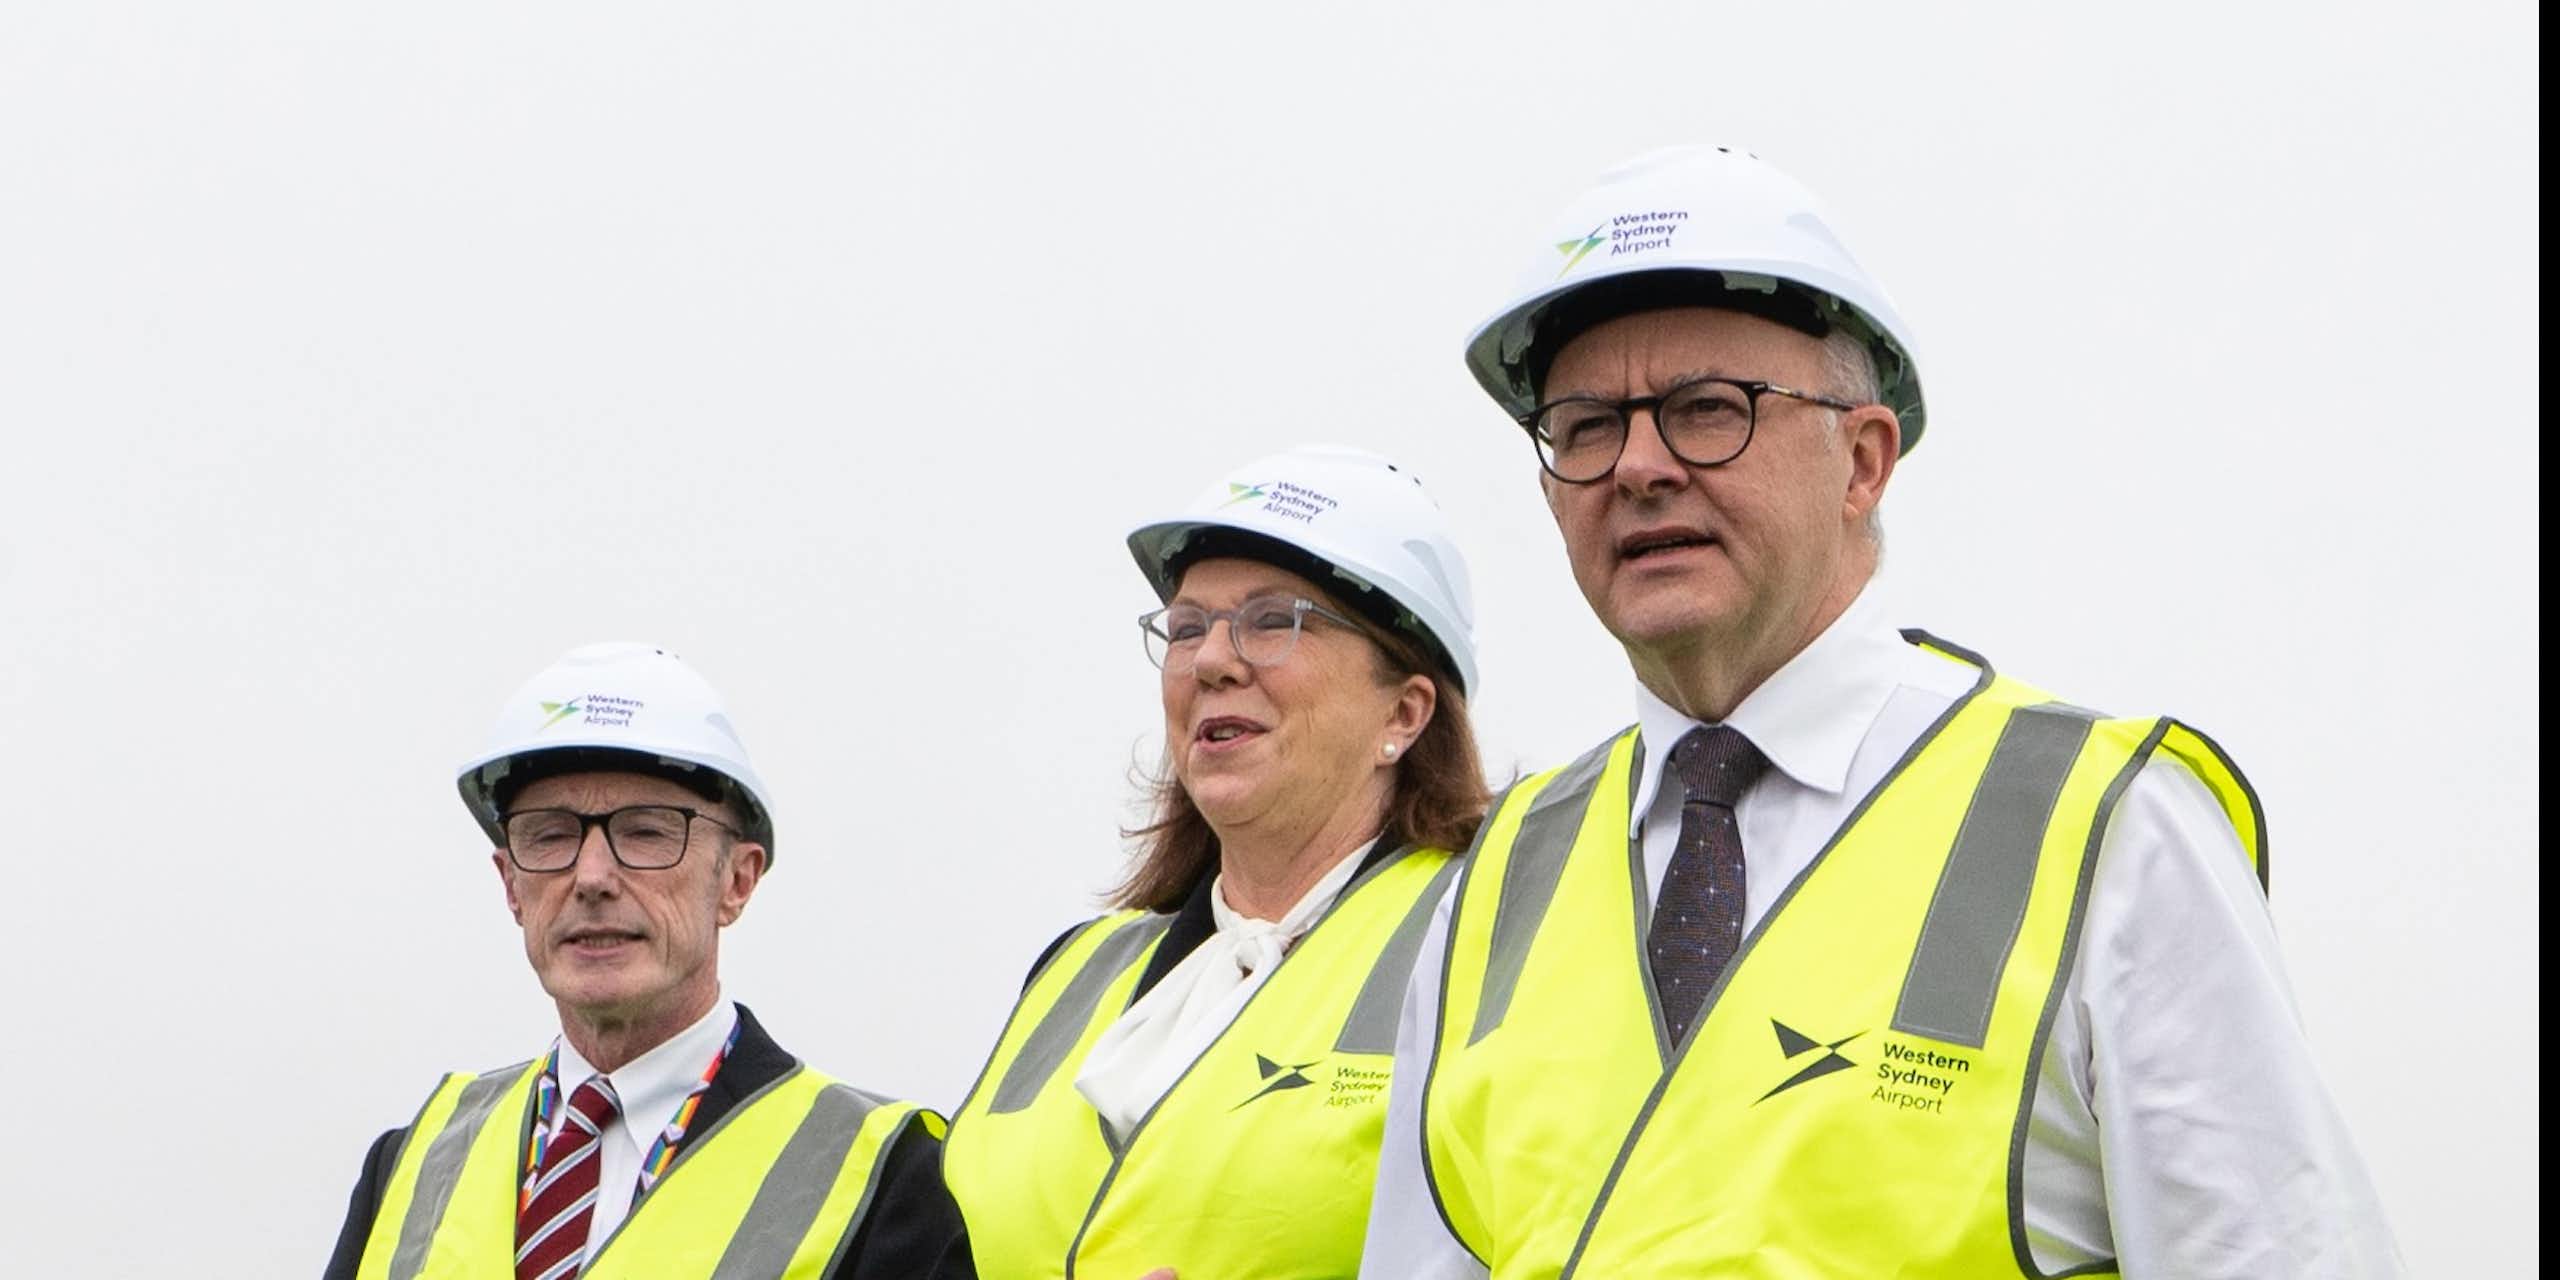 Minister Catherine King (centre) and Prime Minister Anthony Albanese (right) wear hardhats and hi-viz vests at an infrastructure announcement